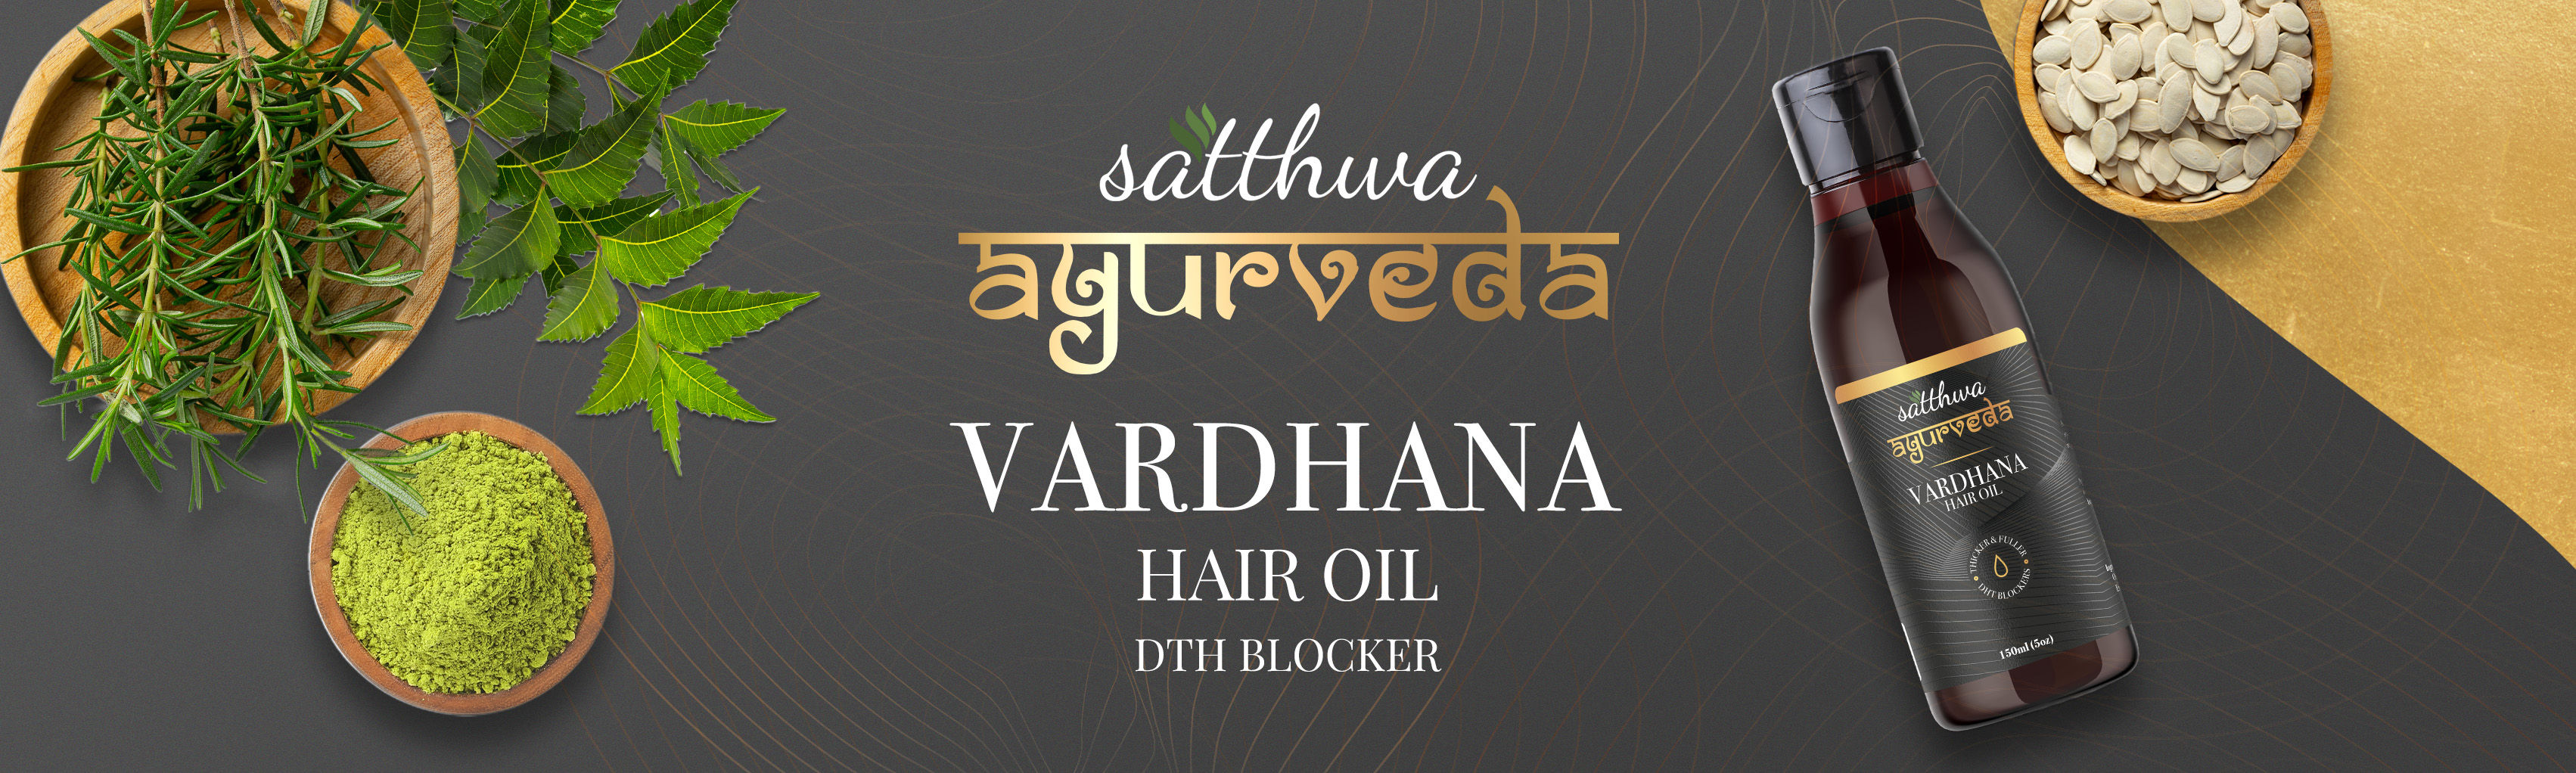 Vardhana Hair Oil Regrowth and Repair Hair loss is a problem that is very  common and is often difficult to emotionally cope with There are a lot  of  By Satthwa  Facebook